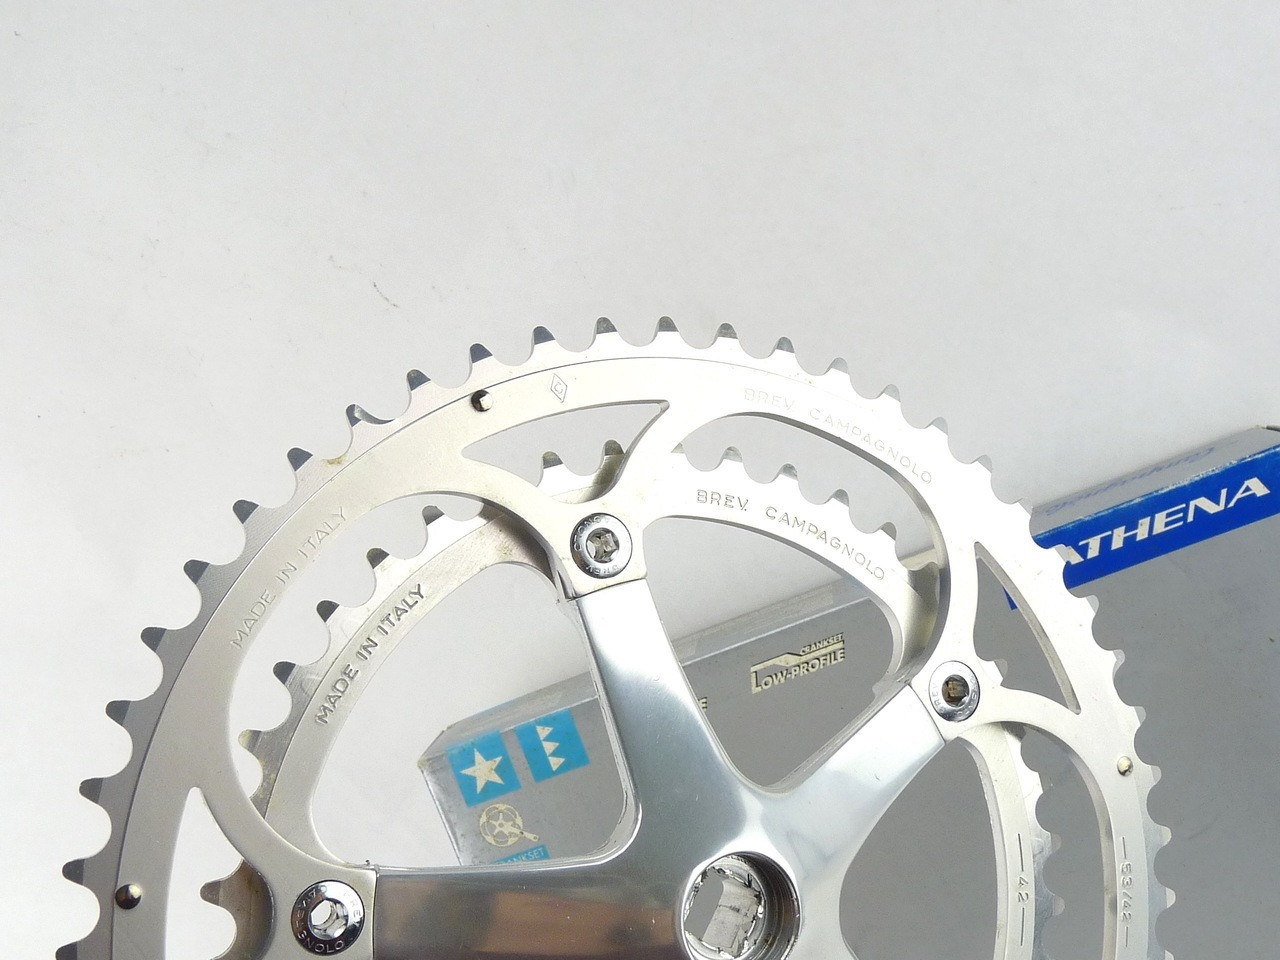 NOS Zeus Chainring All Sizes 119 BCD Black Vintage Retro New Old Stock 